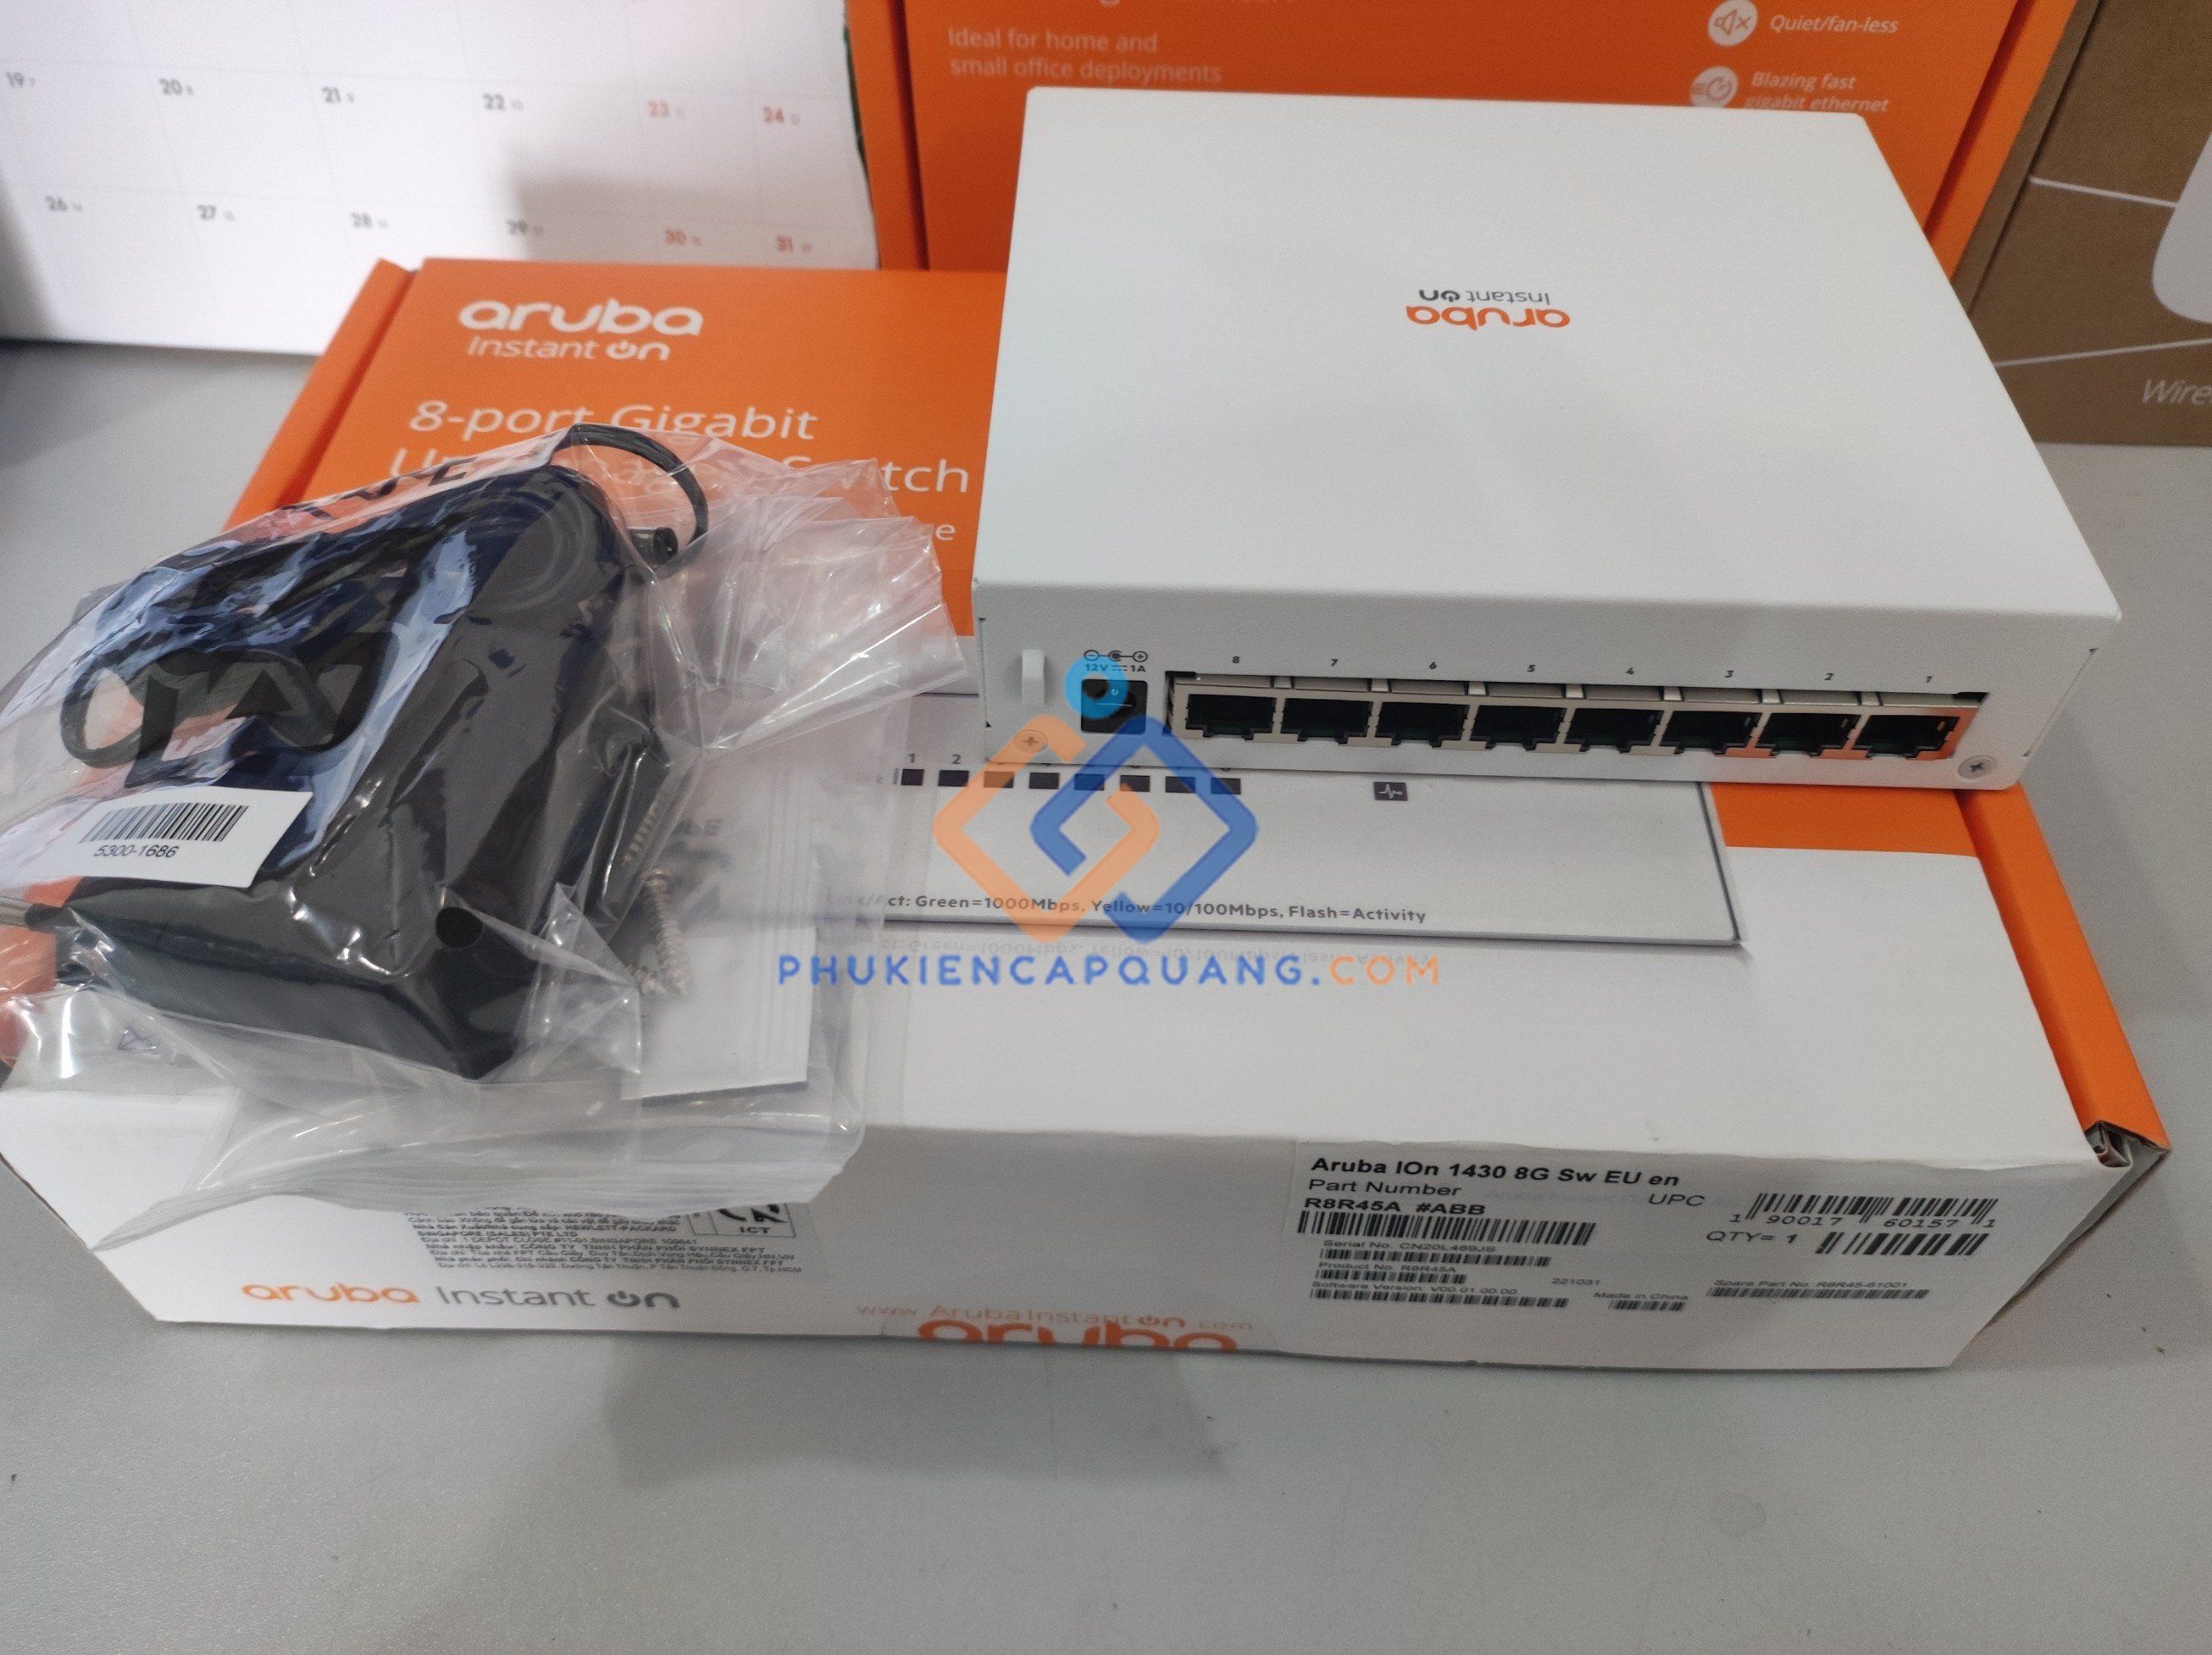 switch-aruba-instant-on-1430-8g-switch-r8r45a-chinh-hang